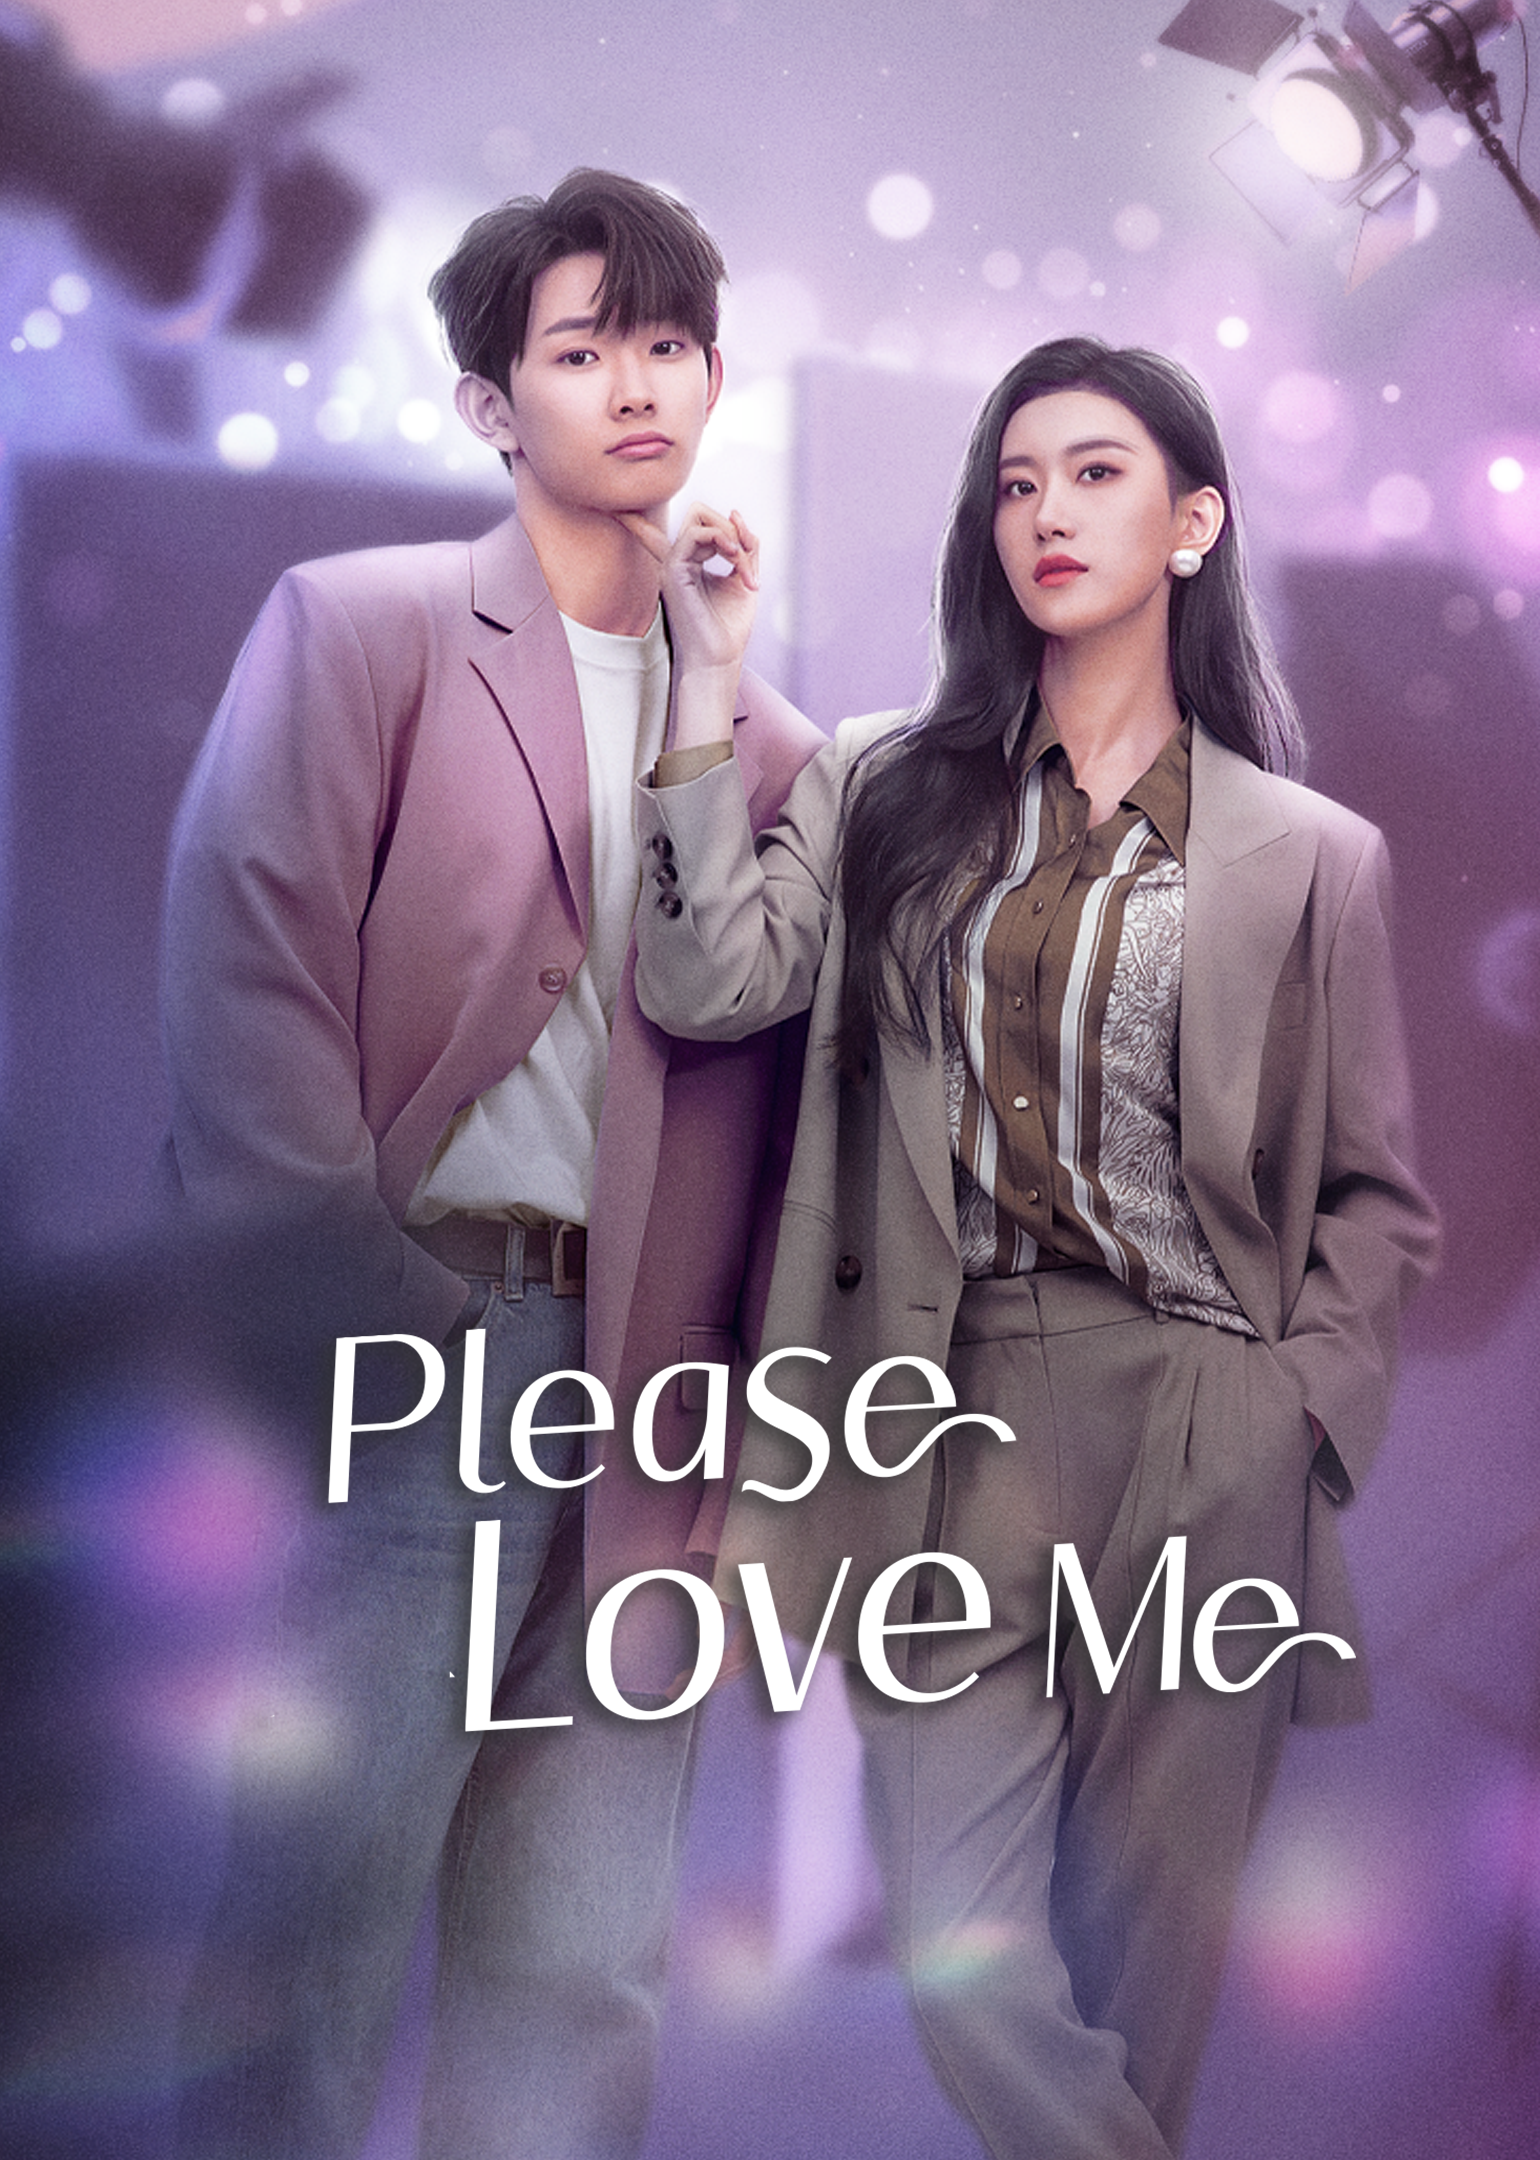 Please Love Me, Watch with English Subtitles & More